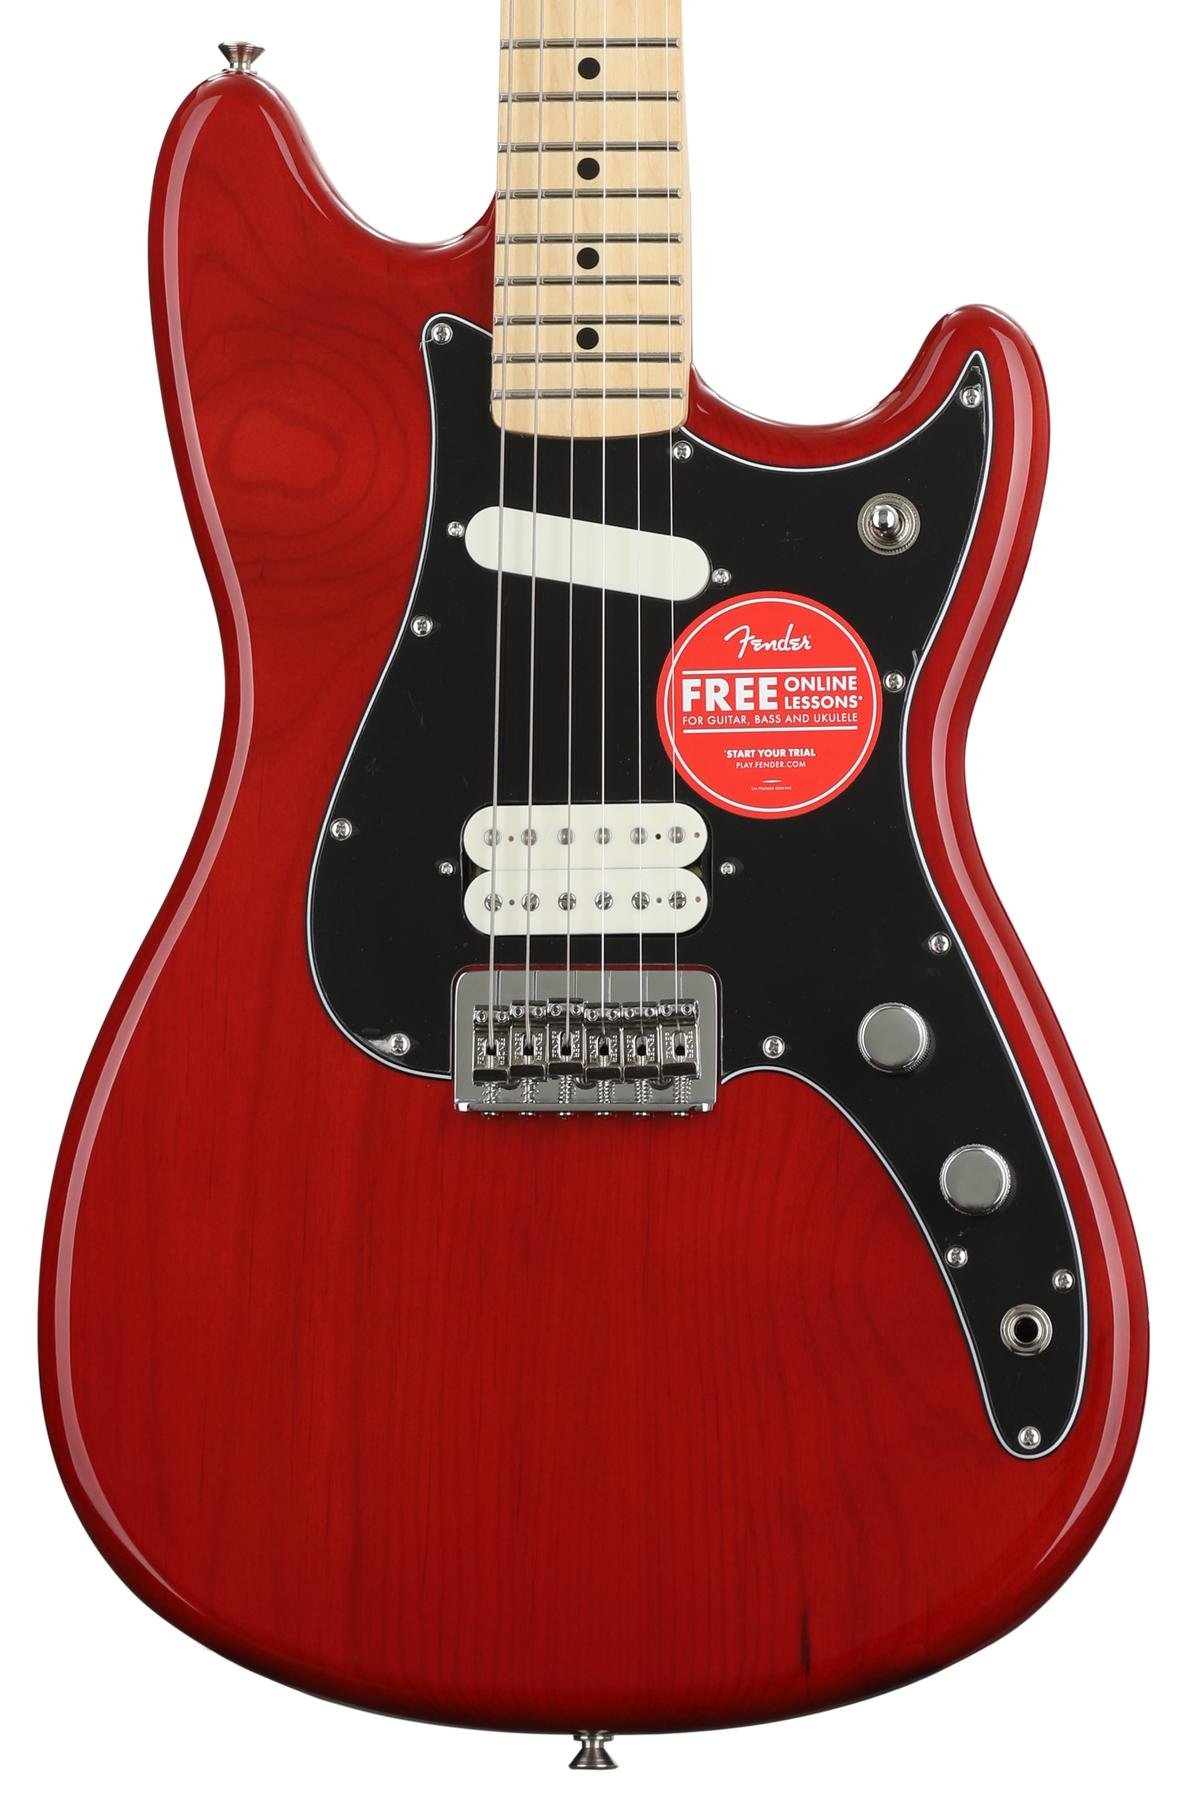 Fender Player Duo Sonic Hs Crimson Red Transparent Sweetwater